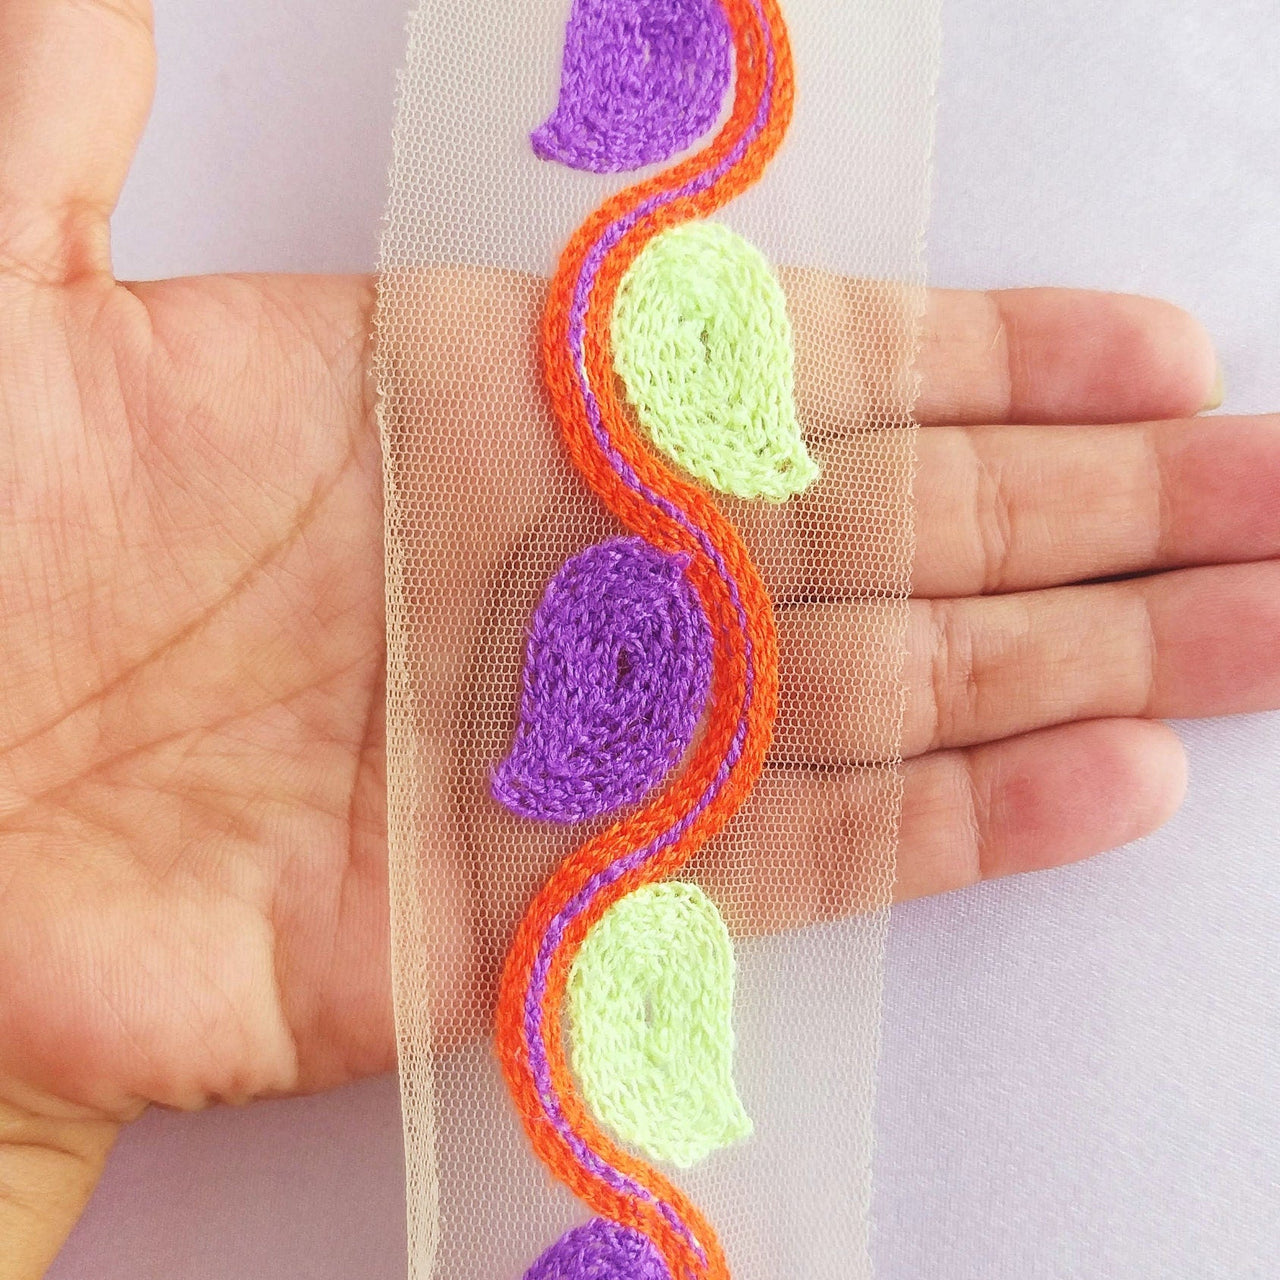 Beige Net With Green, Purple And Orange Embroidery, Leaves Pattern Trim